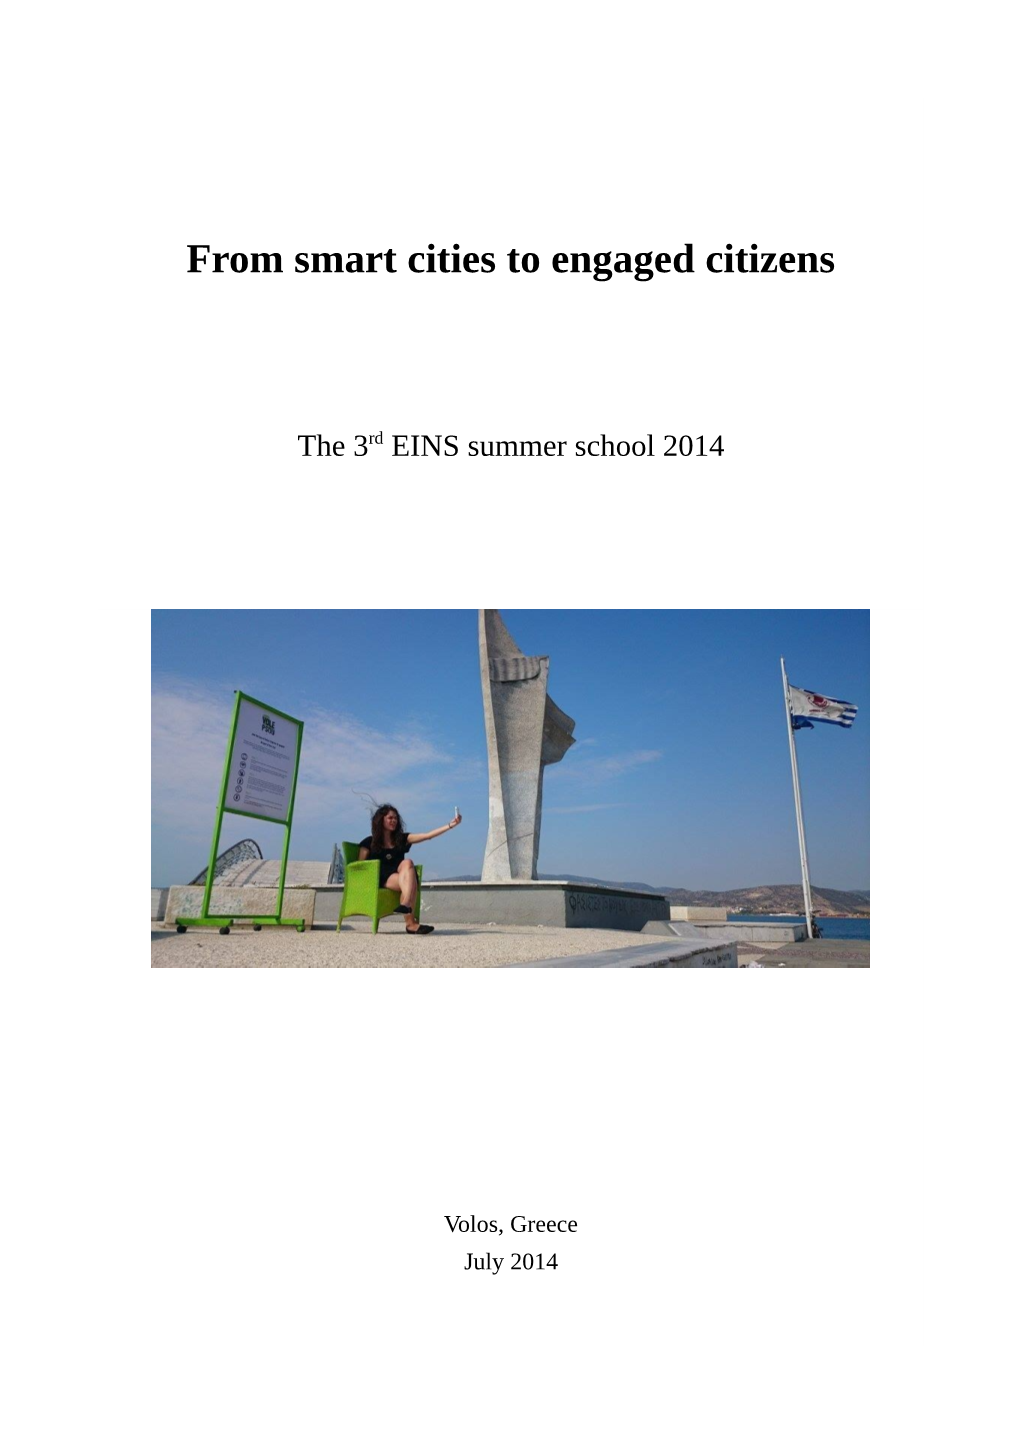 From Smart Cities to Engaged Citizens